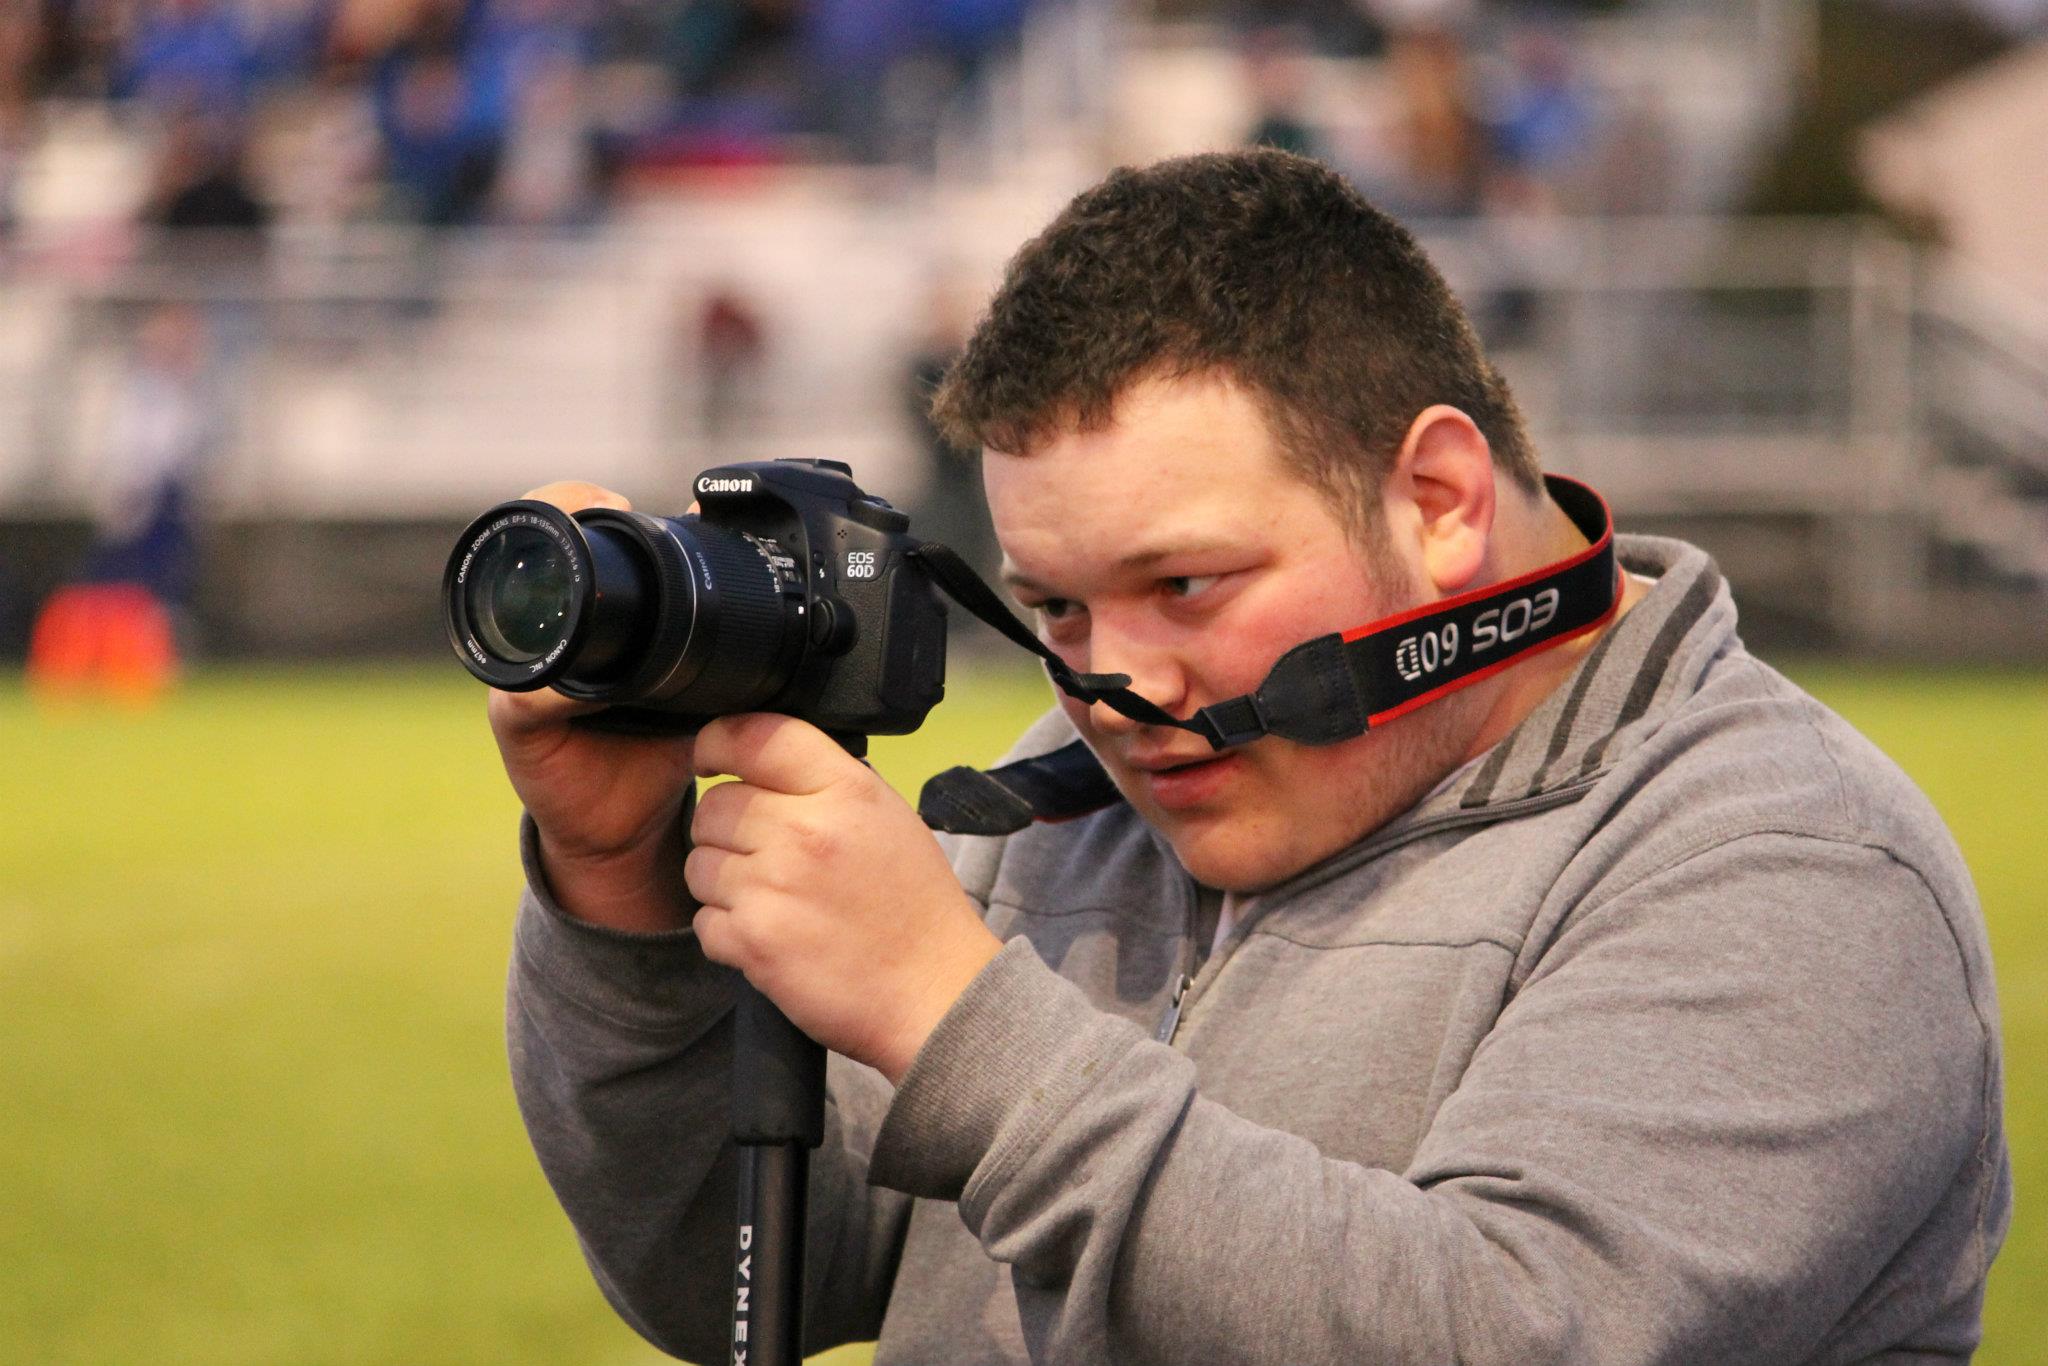 Filming for Genoa-Kingston High School for homecoming with the Canon 60D.